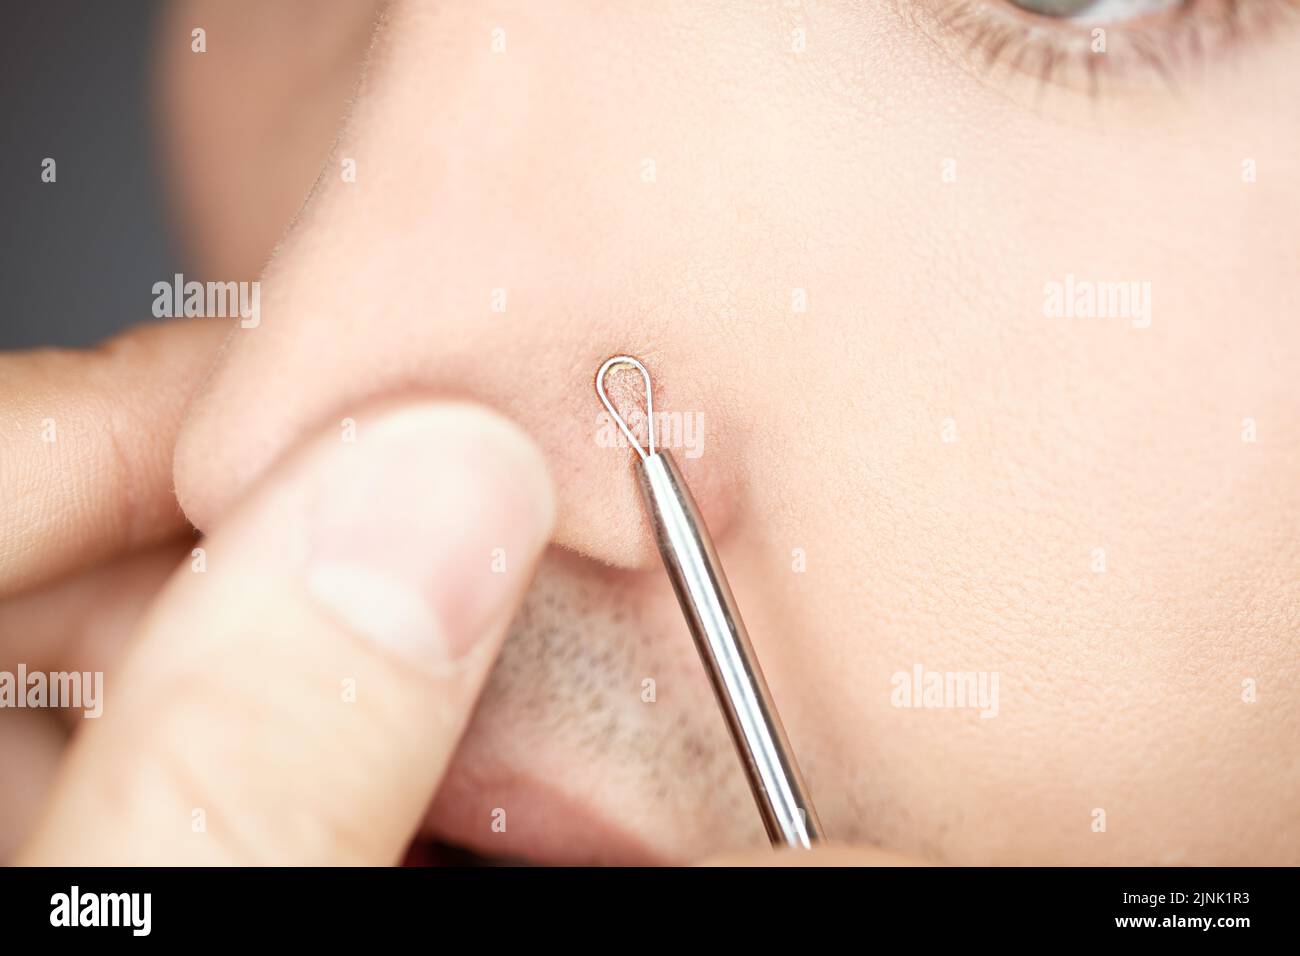 A pimple remover on male skin to care and clean pores and get blackheads out of nose Stock Photo